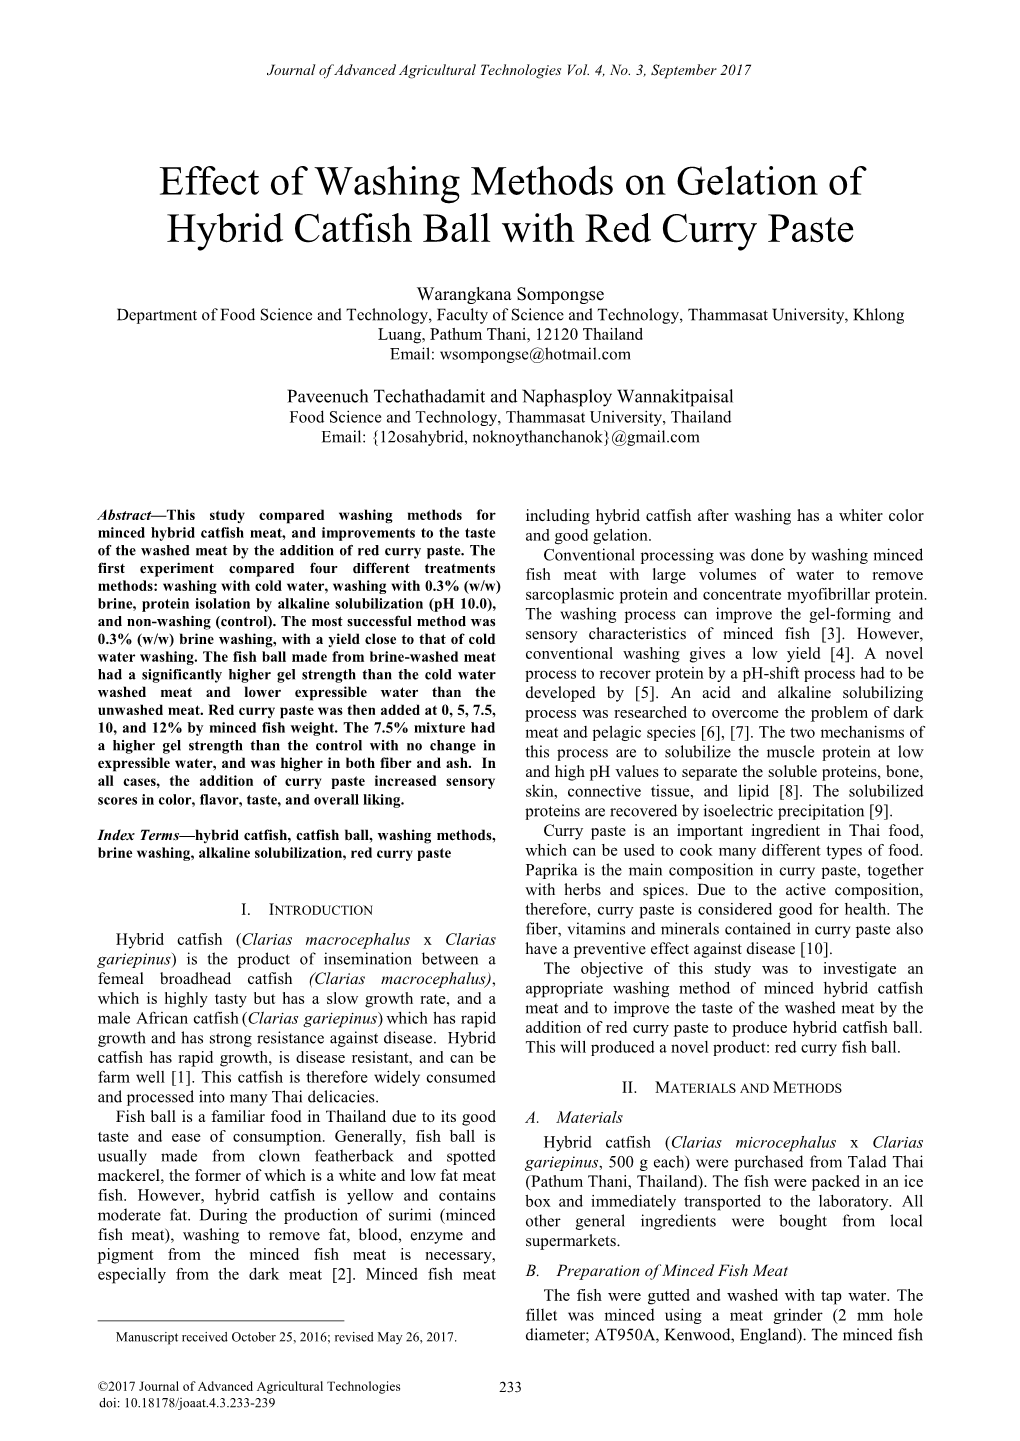 Effect of Washing Methods on Gelation of Hybrid Catfish Ball with Red Curry Paste